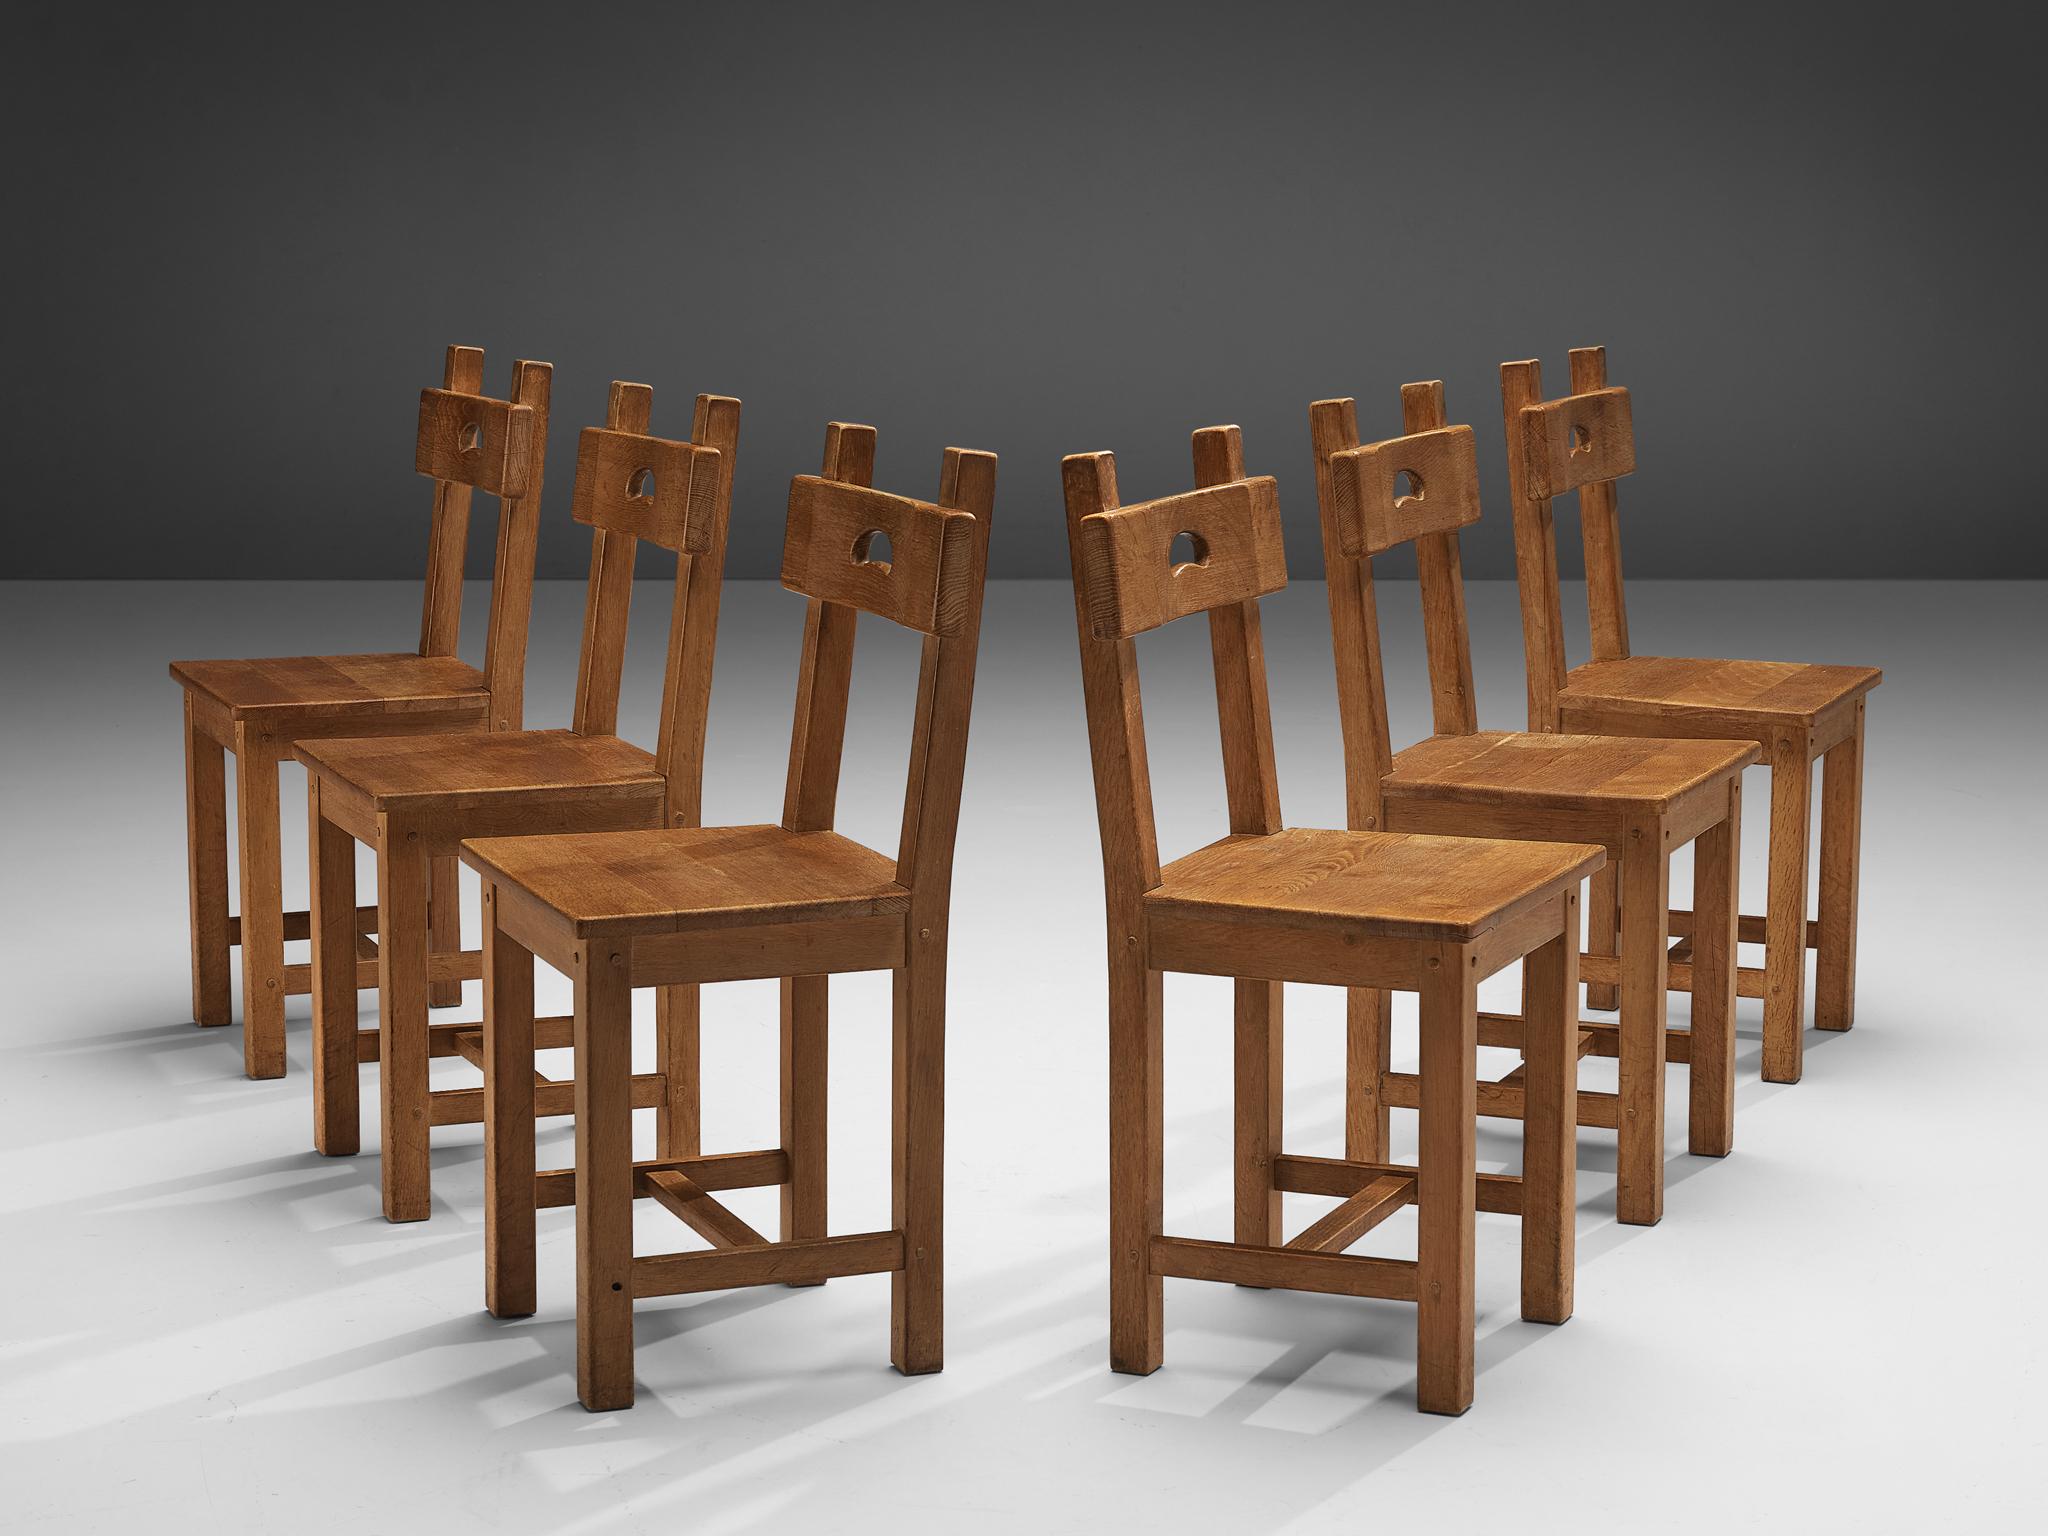 Set of six dining chairs, oak, France, 1950s

Characteristic set of French dining chairs. In absence of decoration the rounded gap in the backrest gets an important visual role as it contrasts with the sharp, angular lines of the frame and seat.